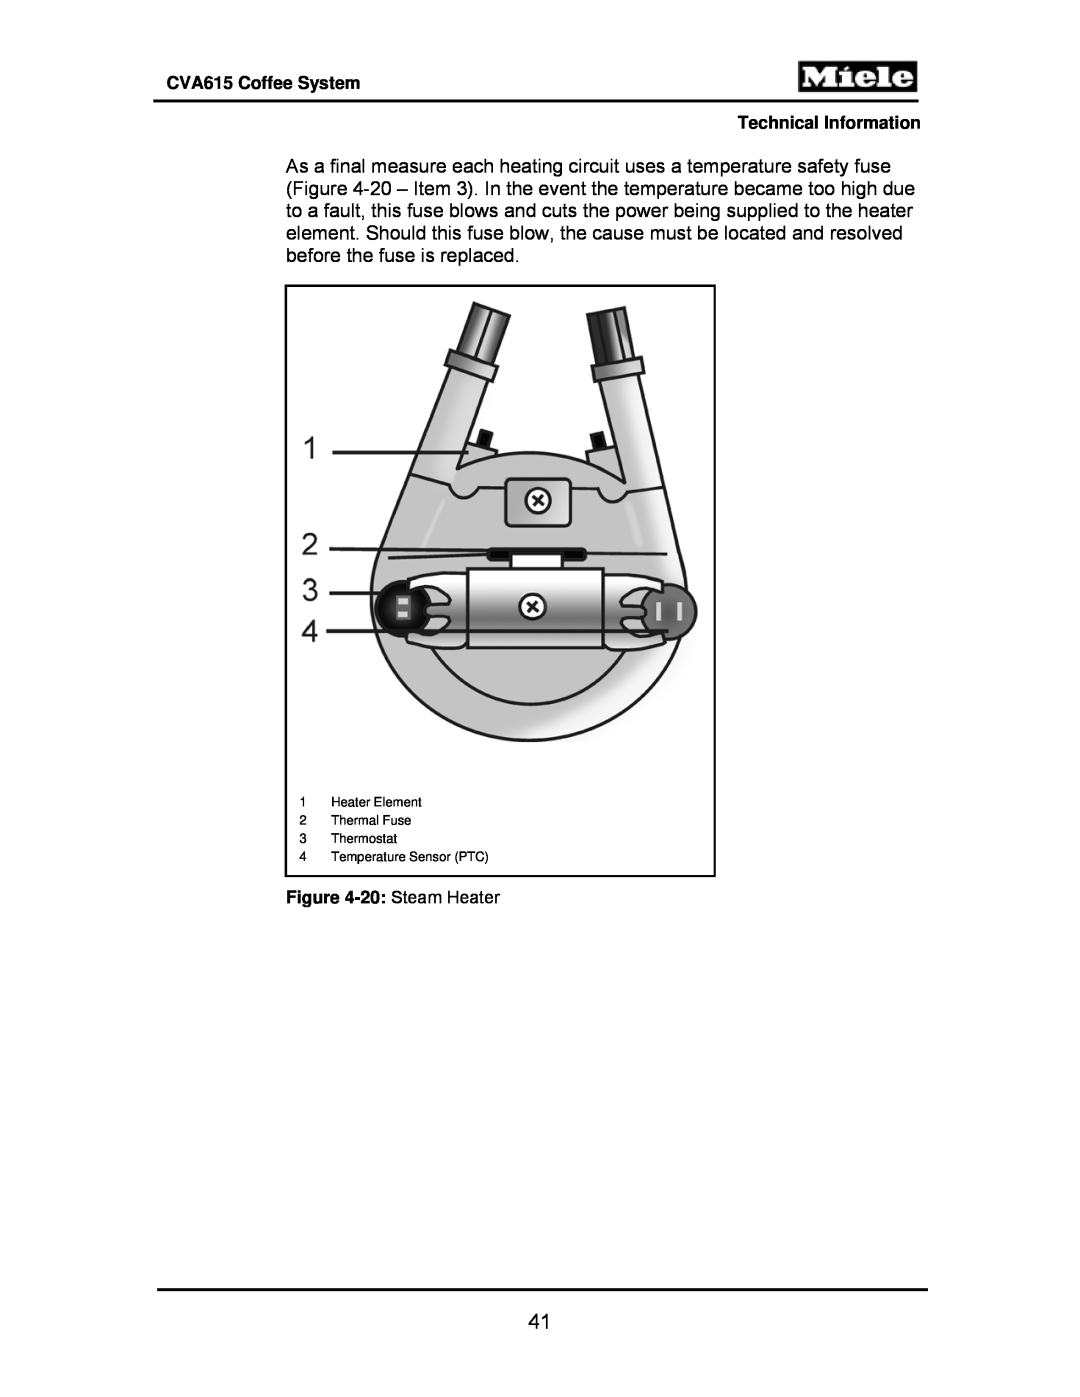 Miele manual CVA615 Coffee System Technical Information, 20: Steam Heater, 1Heater Element 2Thermal Fuse 3Thermostat 